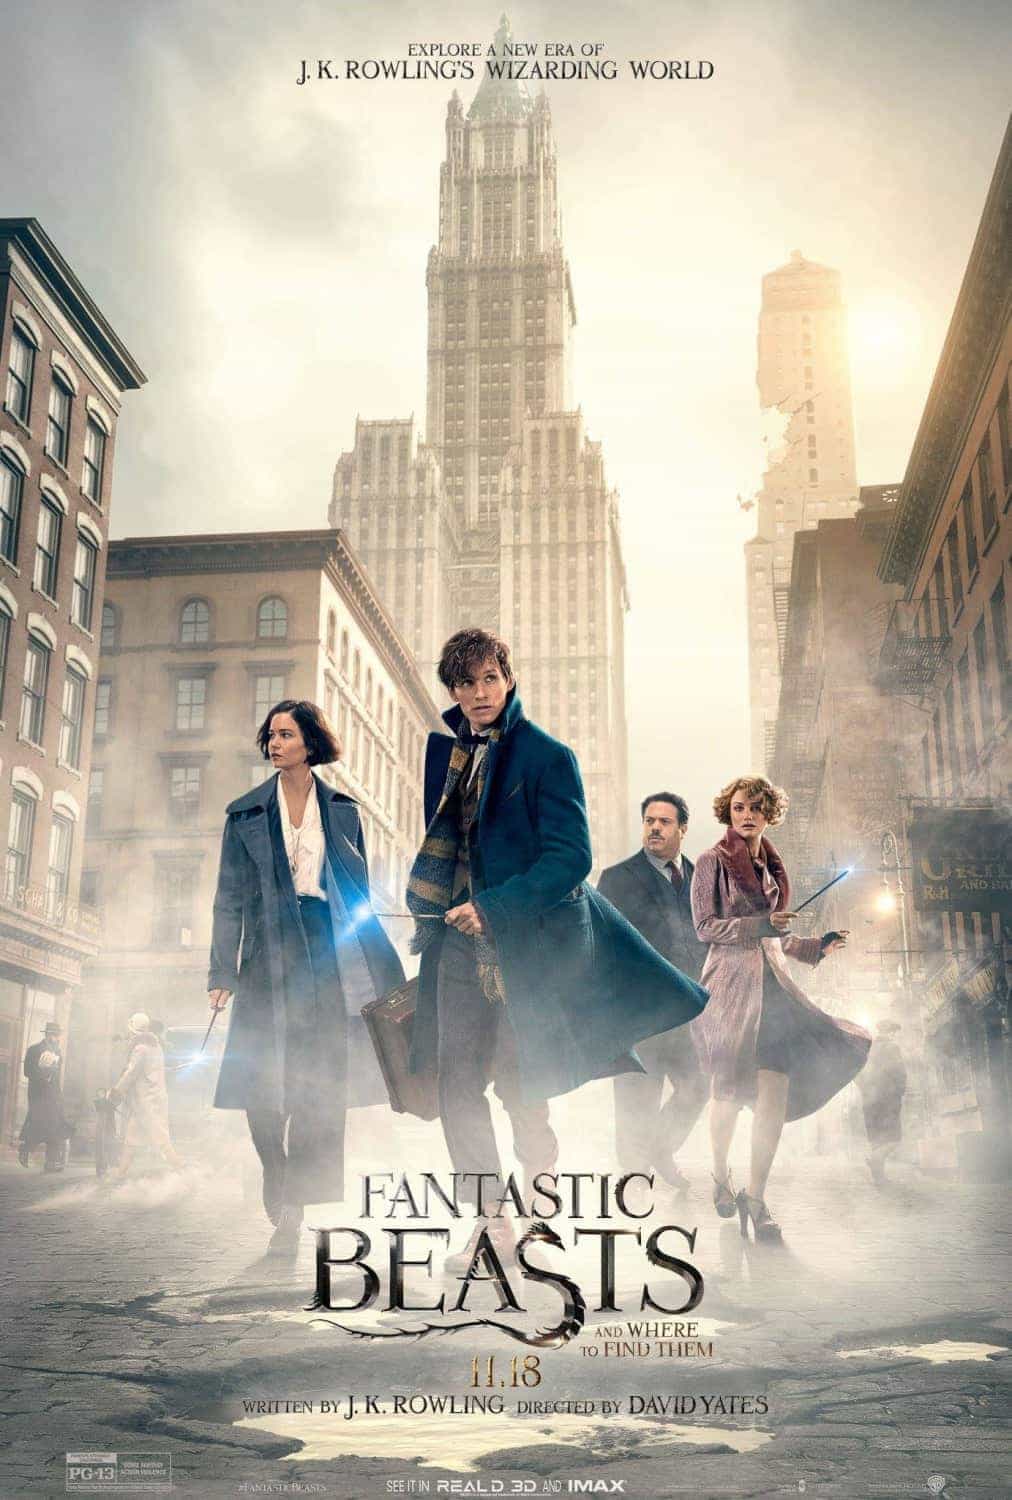 Teaser for Fantastic Beasts and Where to Find Them, gives good plot details - film released 18th November 2016